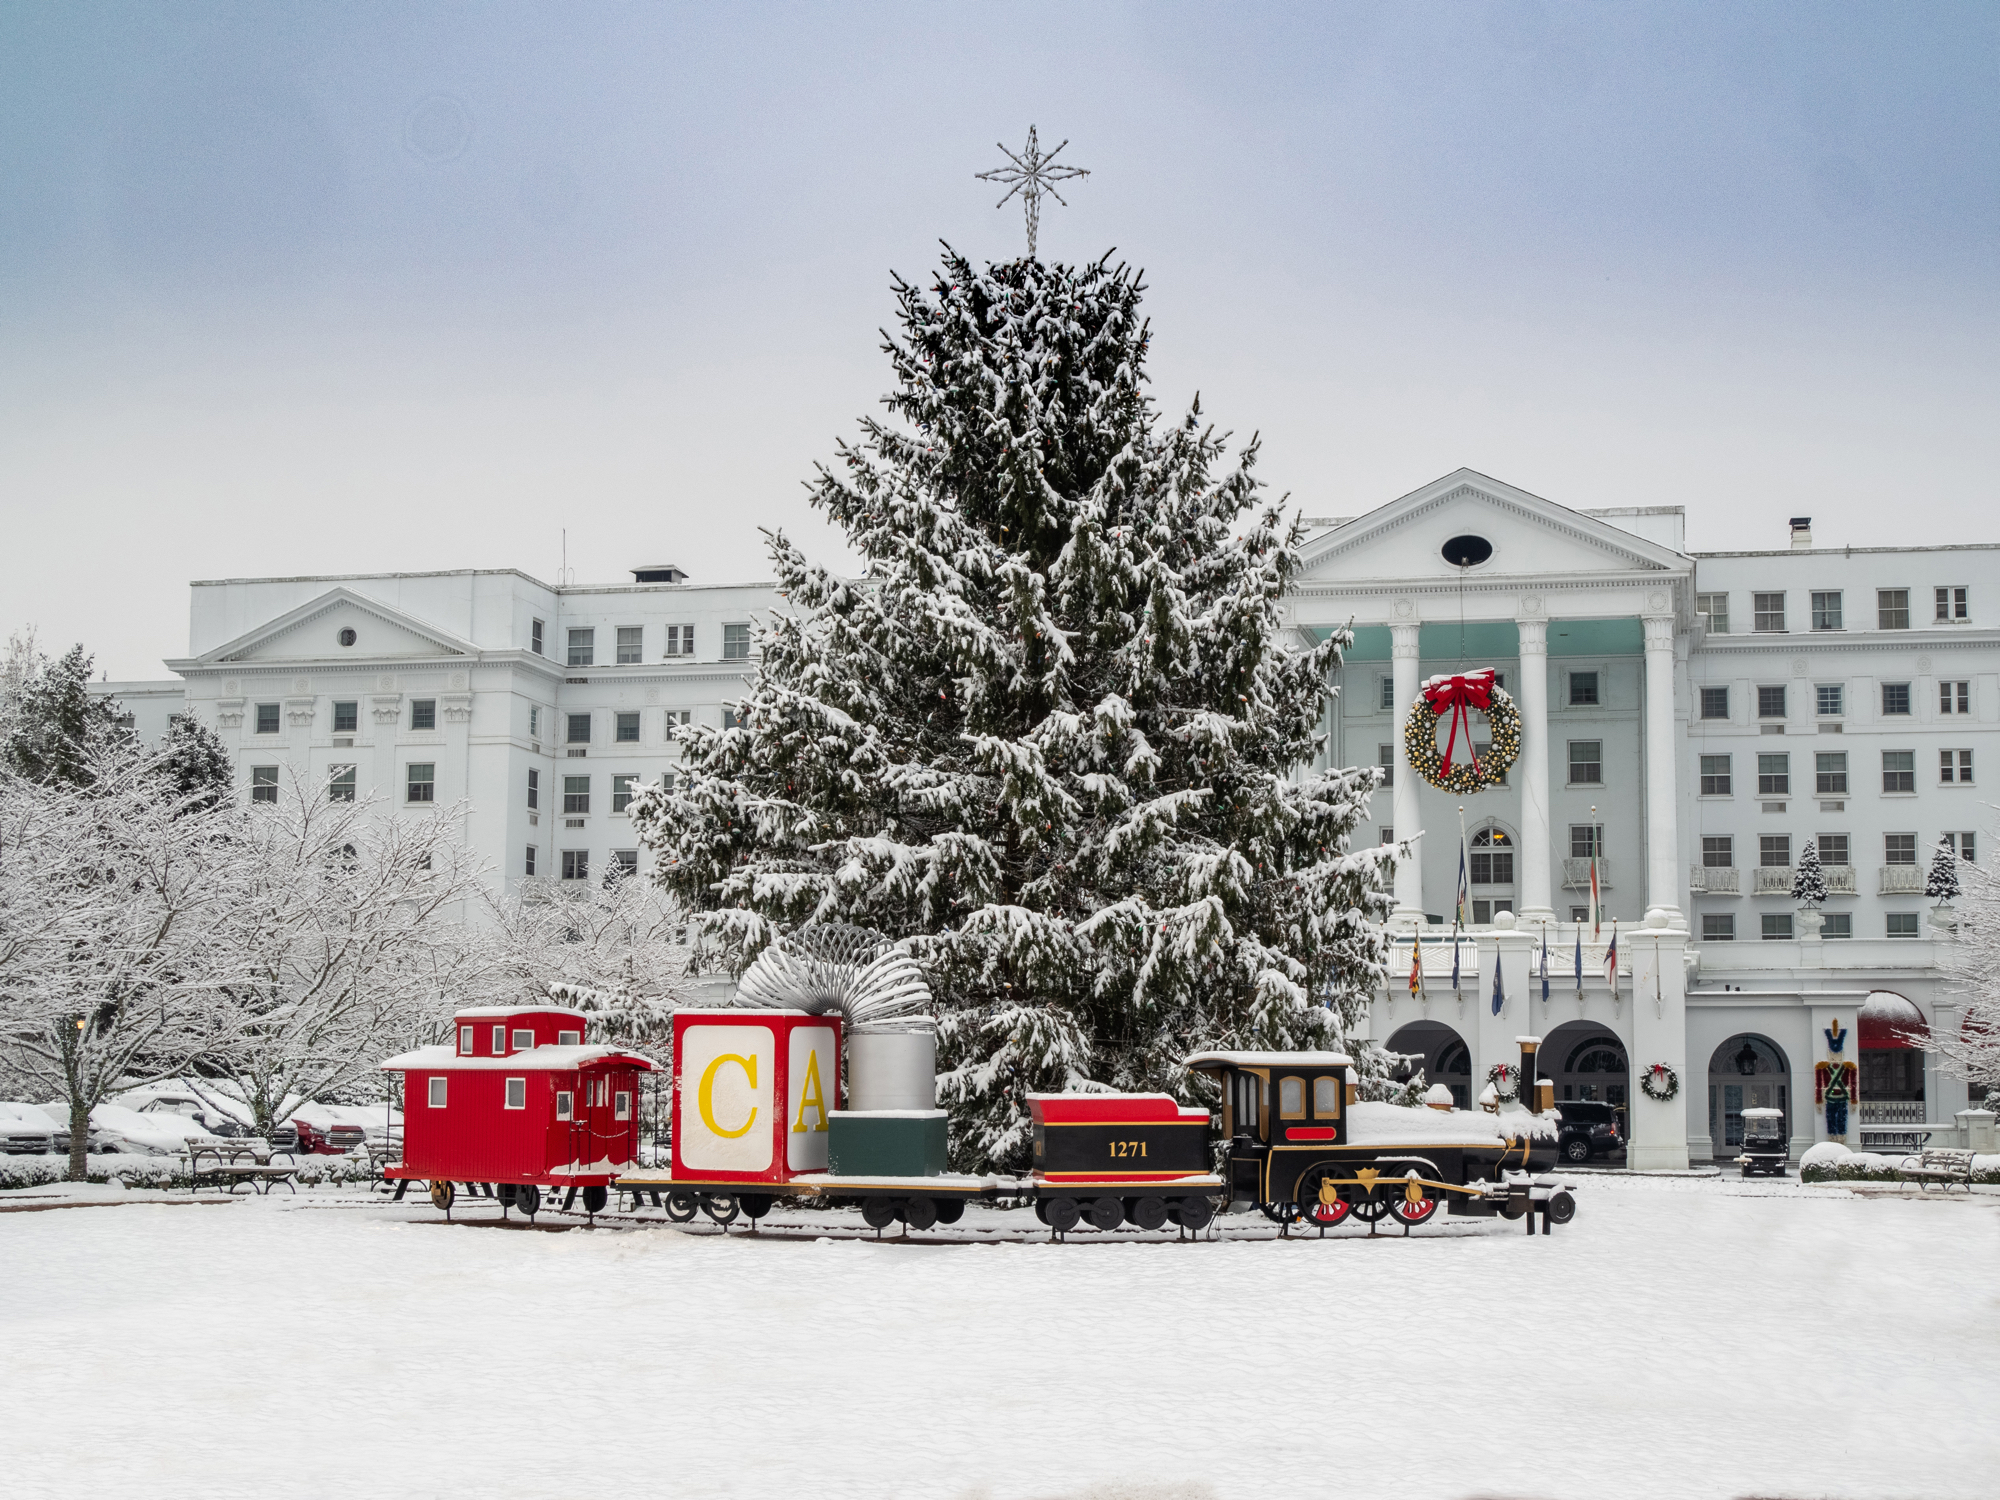 11 Festive Hotels Near DC That Go All Out for Christmas